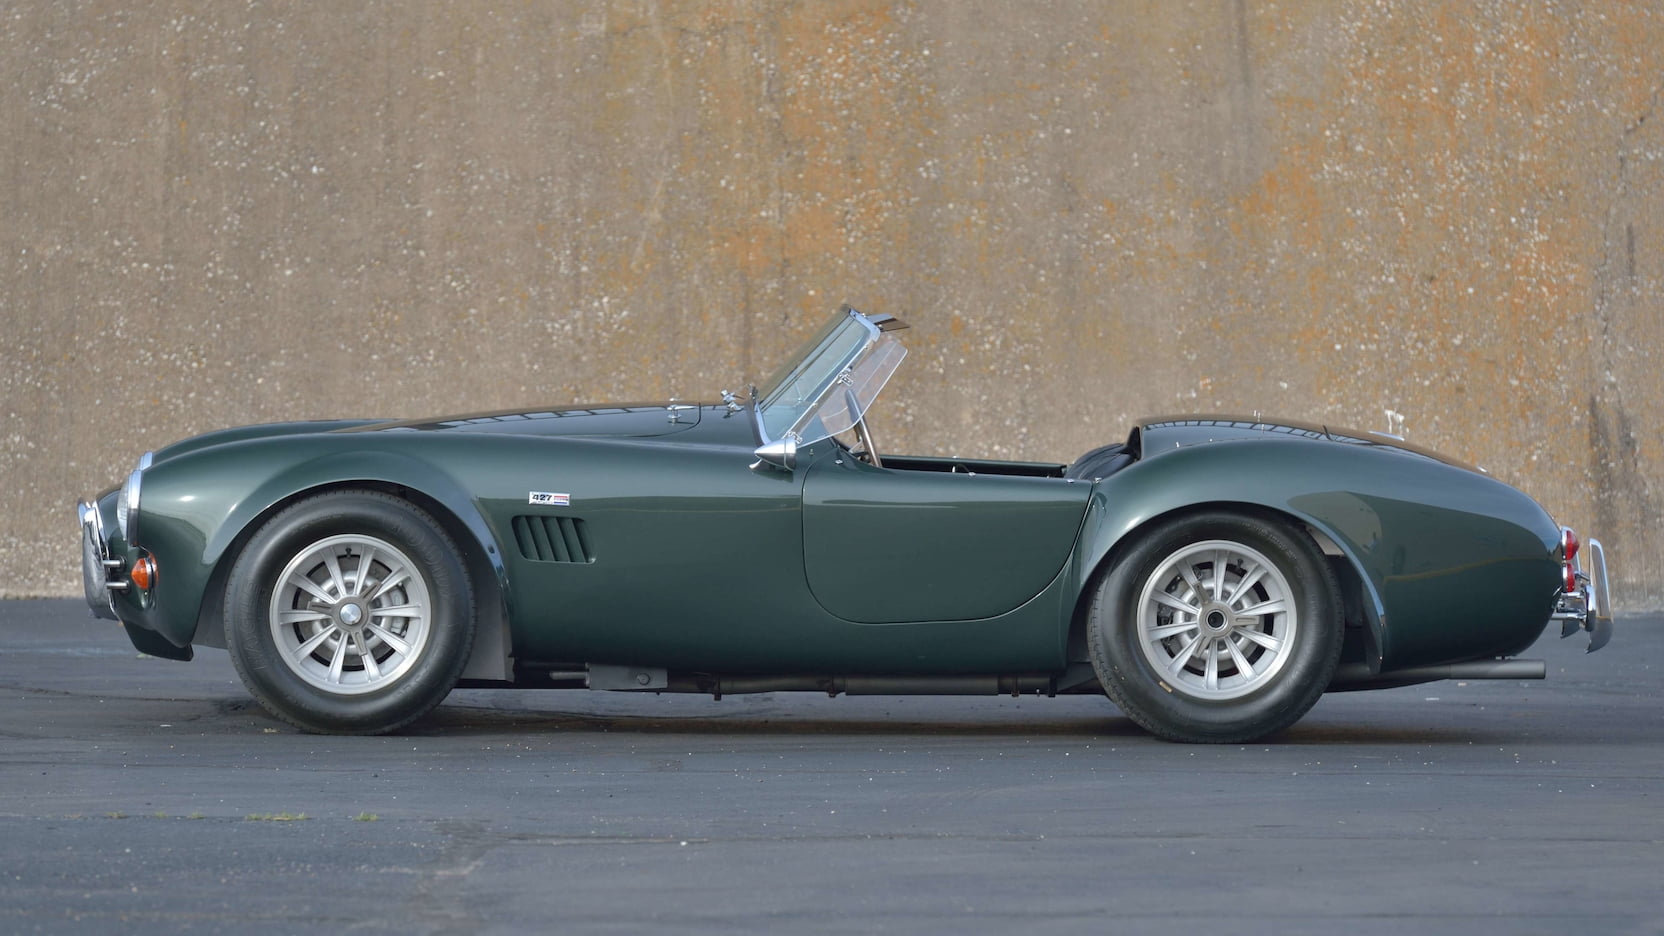 Bigger, wilder and far more muscular, the 427 is how most people see a Shelby Cobra.